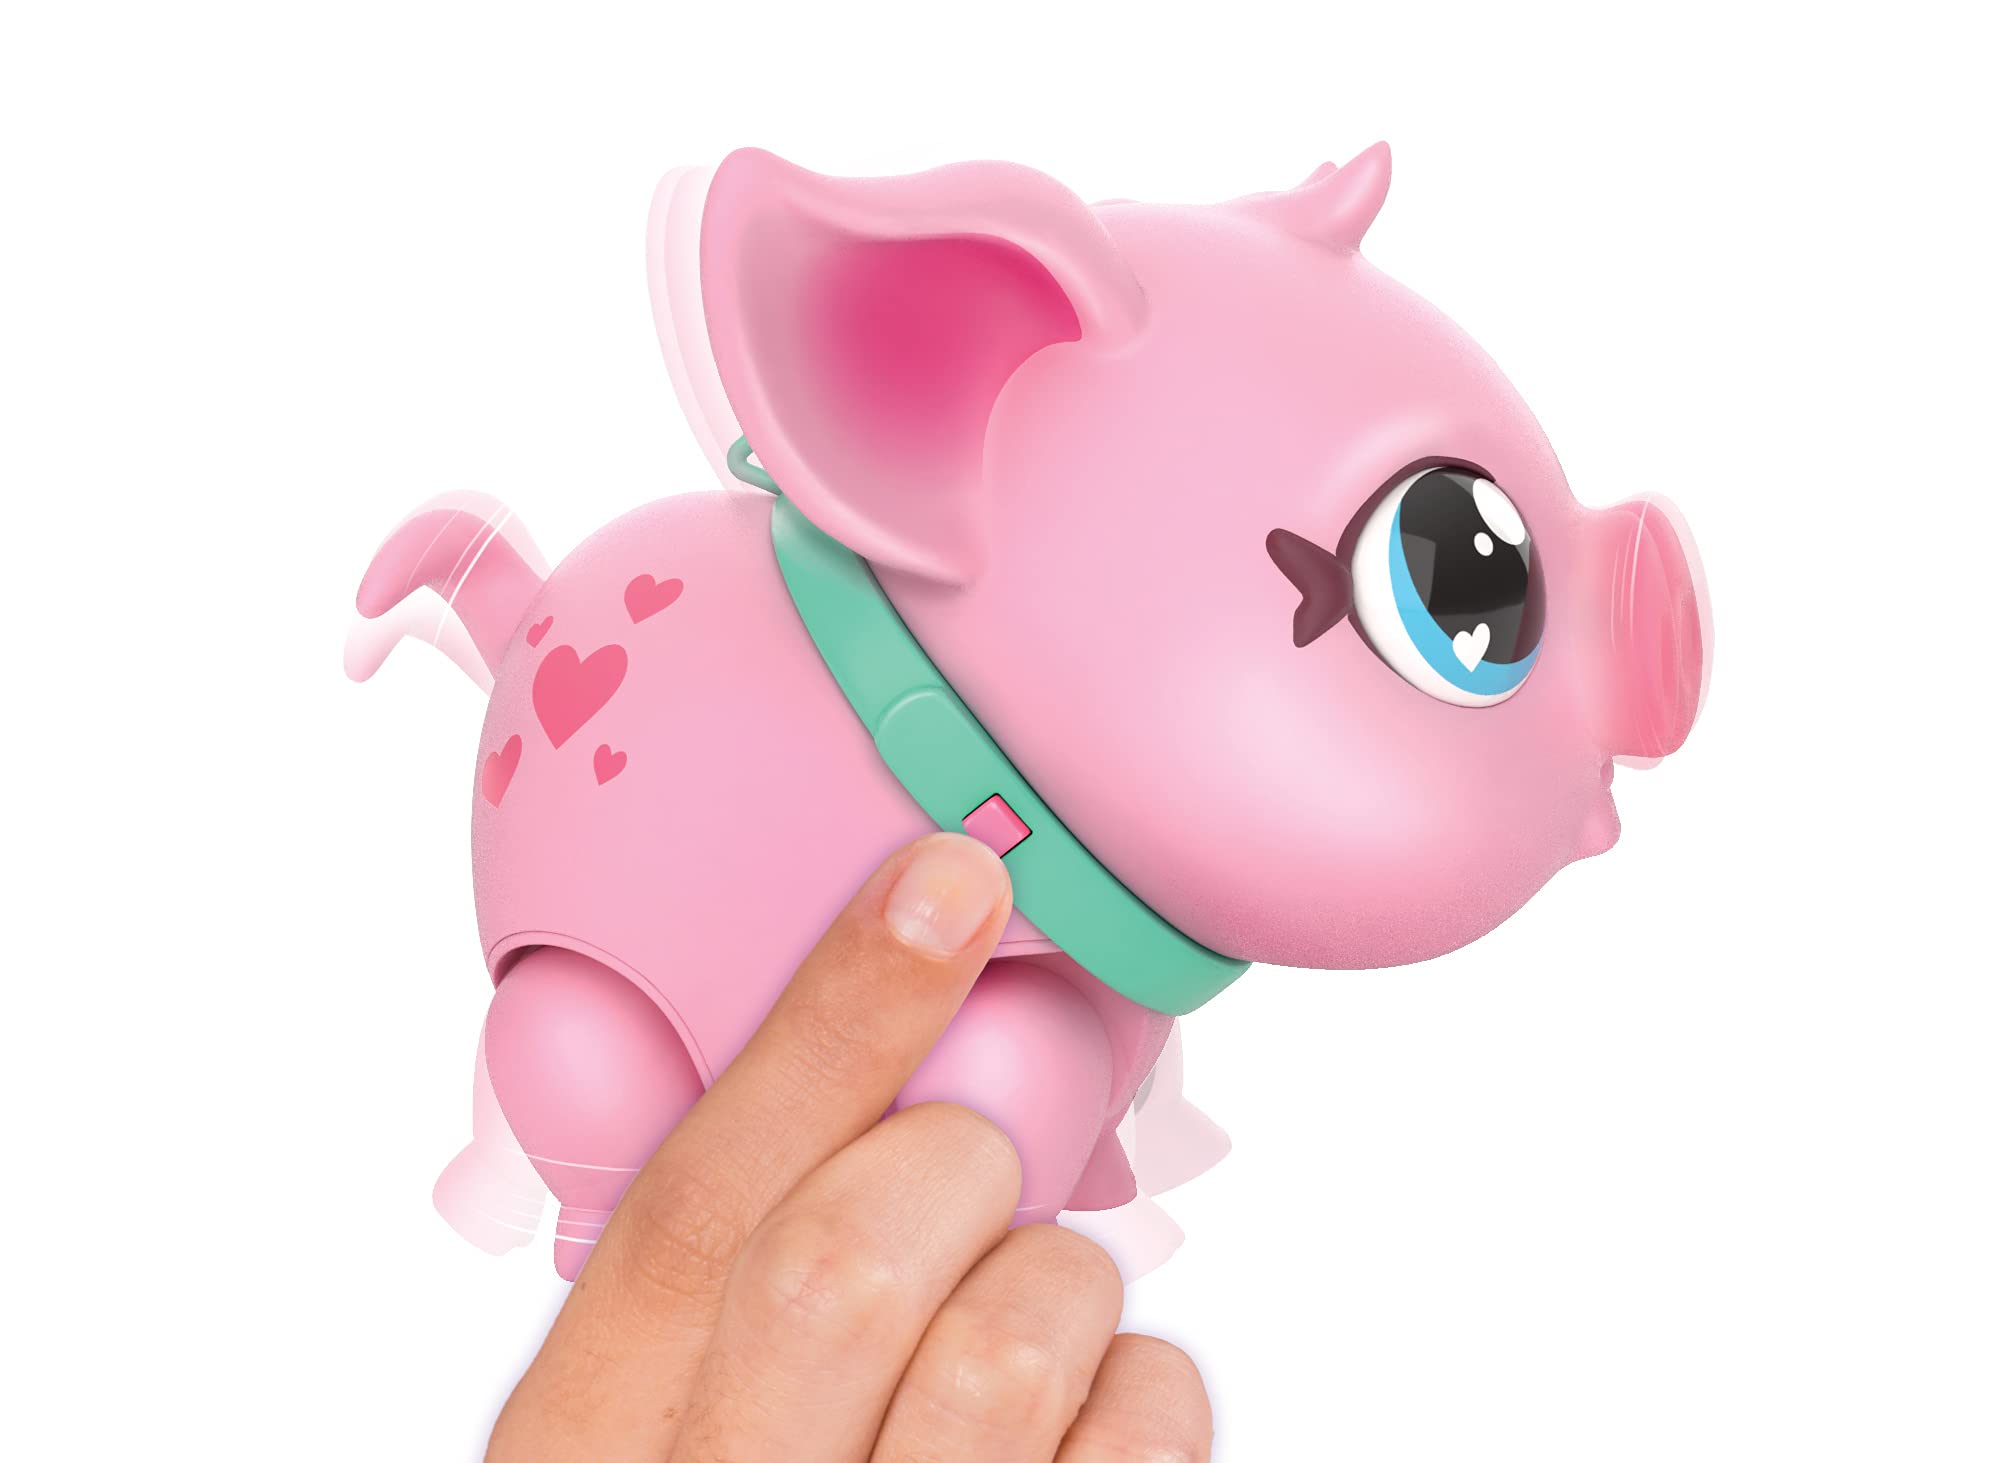 Little Live Pets - My Pet Pig: Piggly | Soft and Jiggly Interactive Toy Pig That Walks, Dances and Nuzzles. 20+ Sounds & Reactions. Batteries Included. for Kids Ages 4+